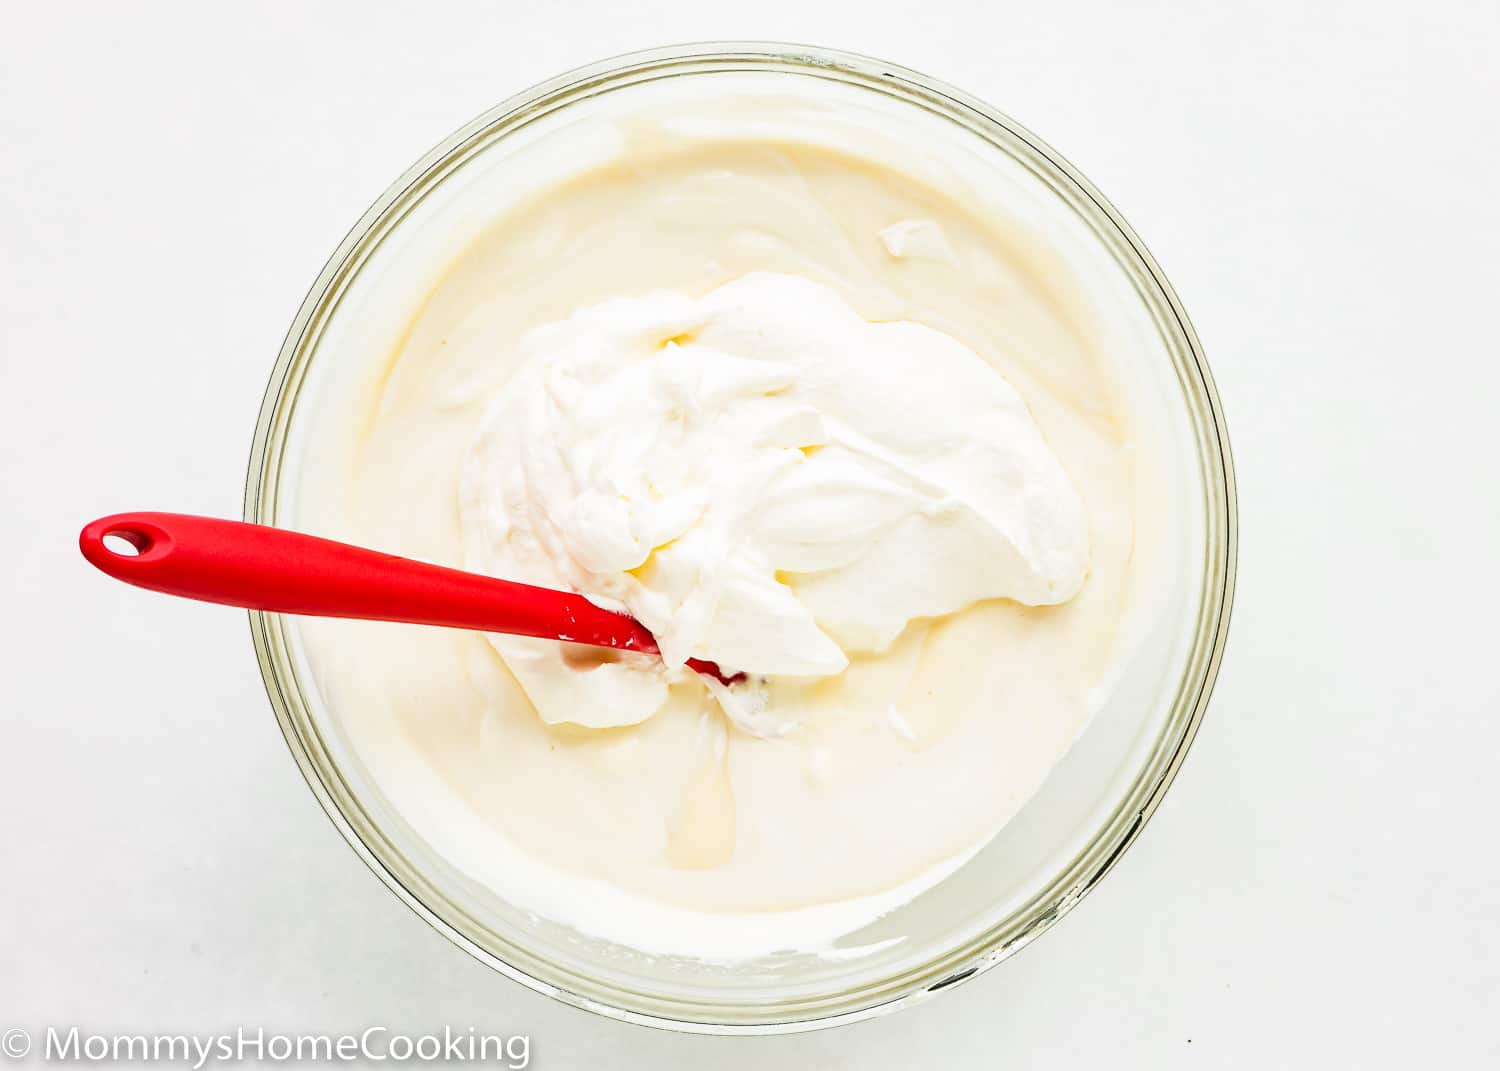 Eggless vanilla pudding with whipped cream and a red spatula.